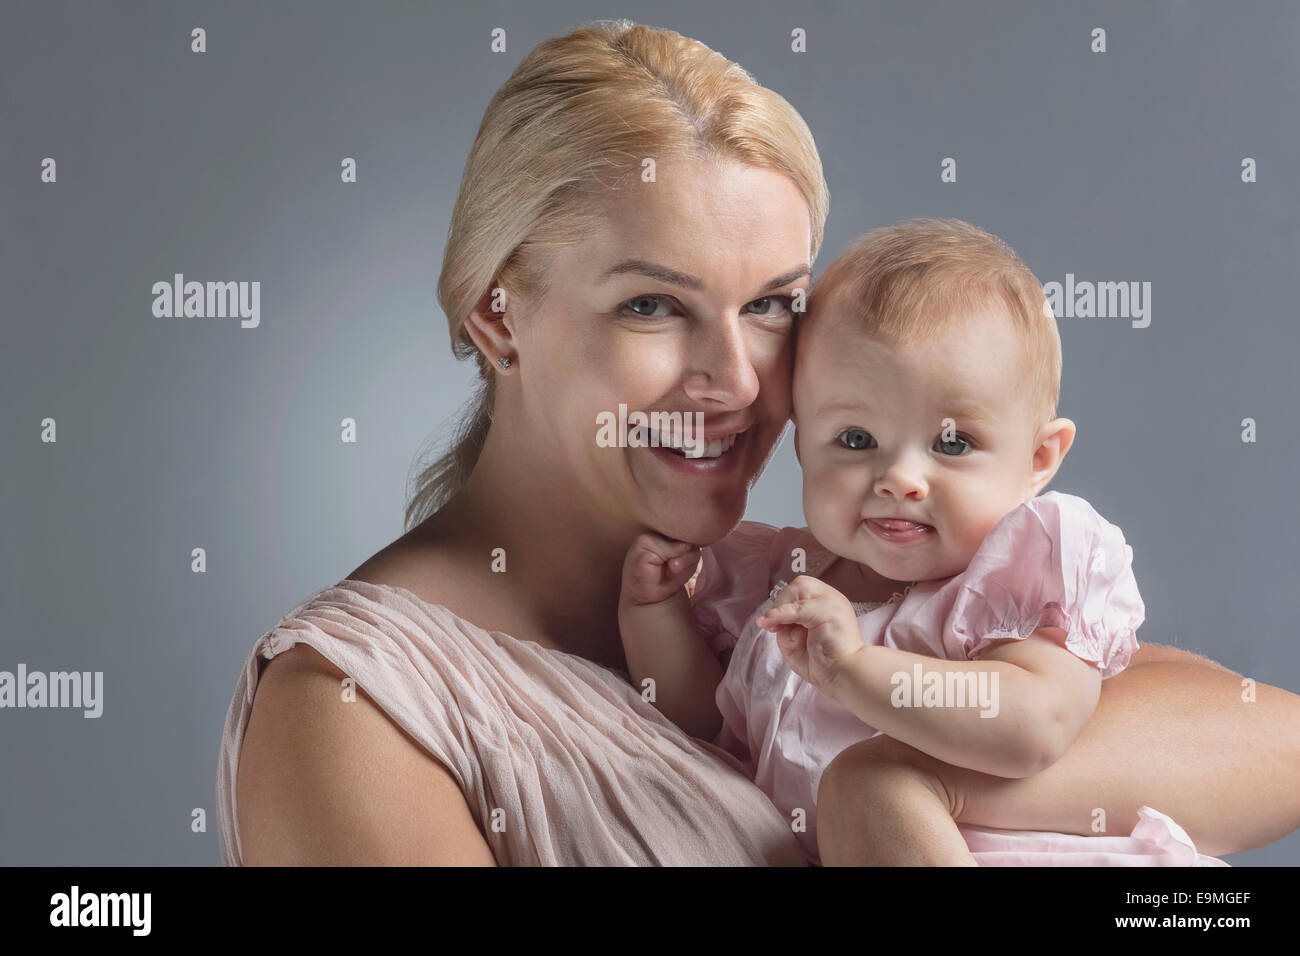 Portrait of happy mother carrying cute baby girl against gray background Stock Photo